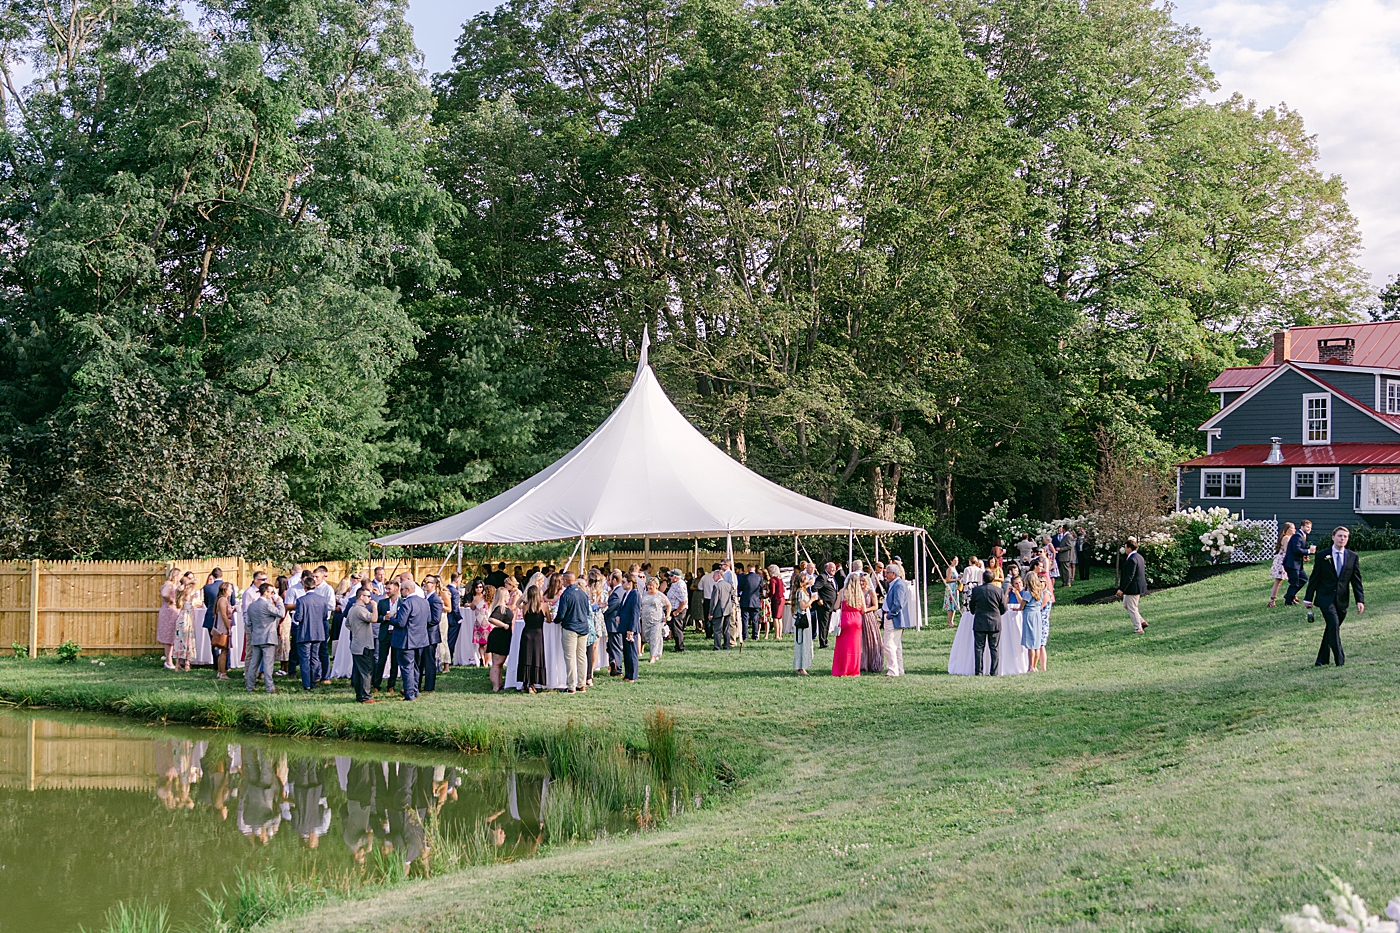 Cocktail hour tent during intimate wedding | Image by Hope Helmuth Photography